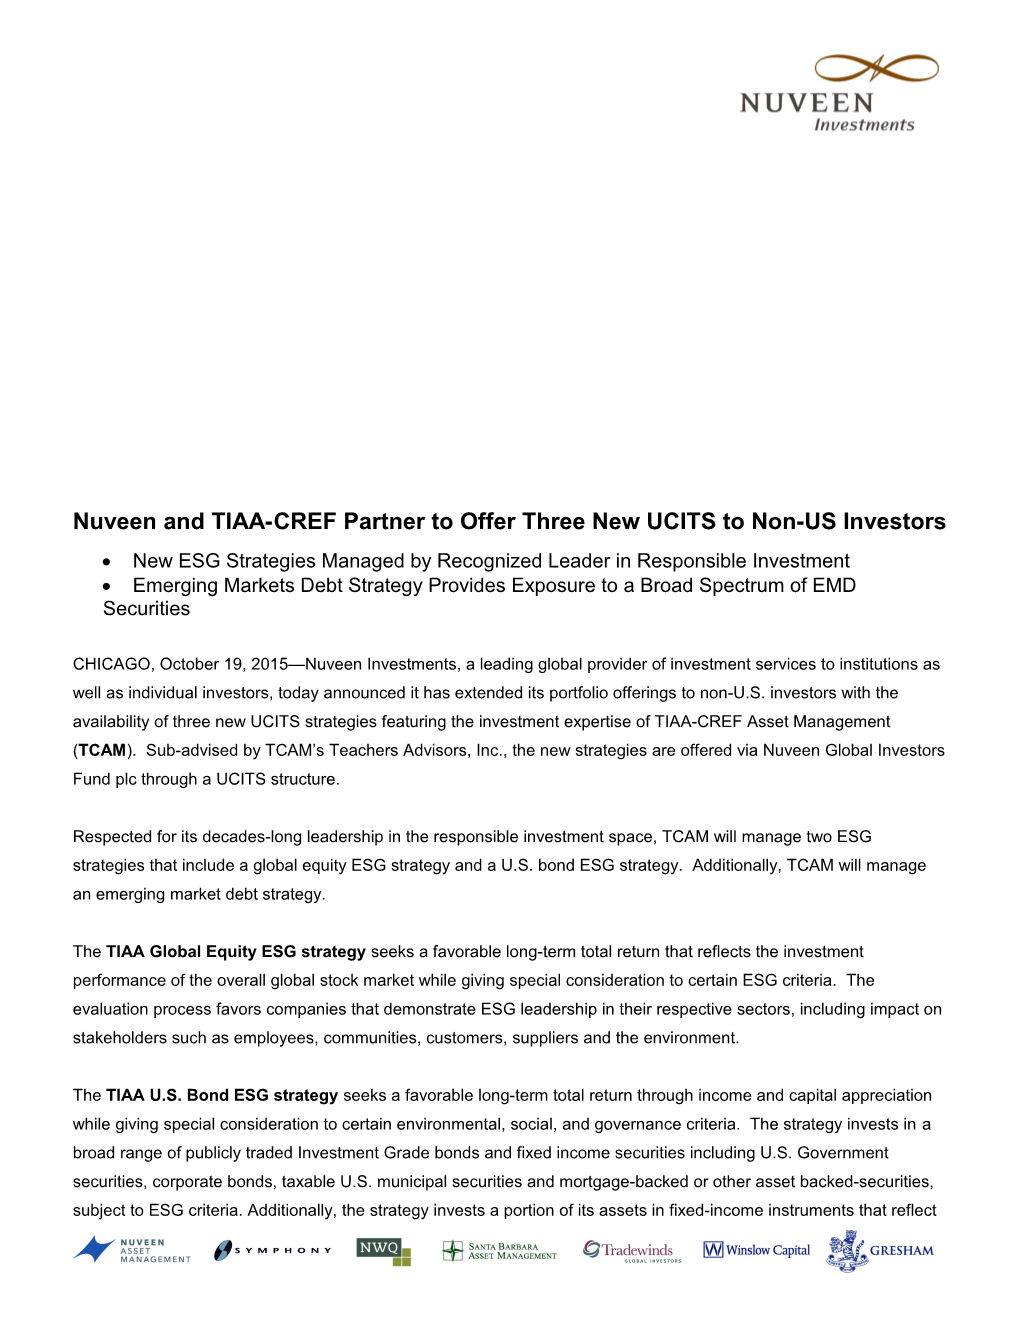 Nuveen and TIAA-CREF Partner to Offerthree New UCITS to Non-US Investors